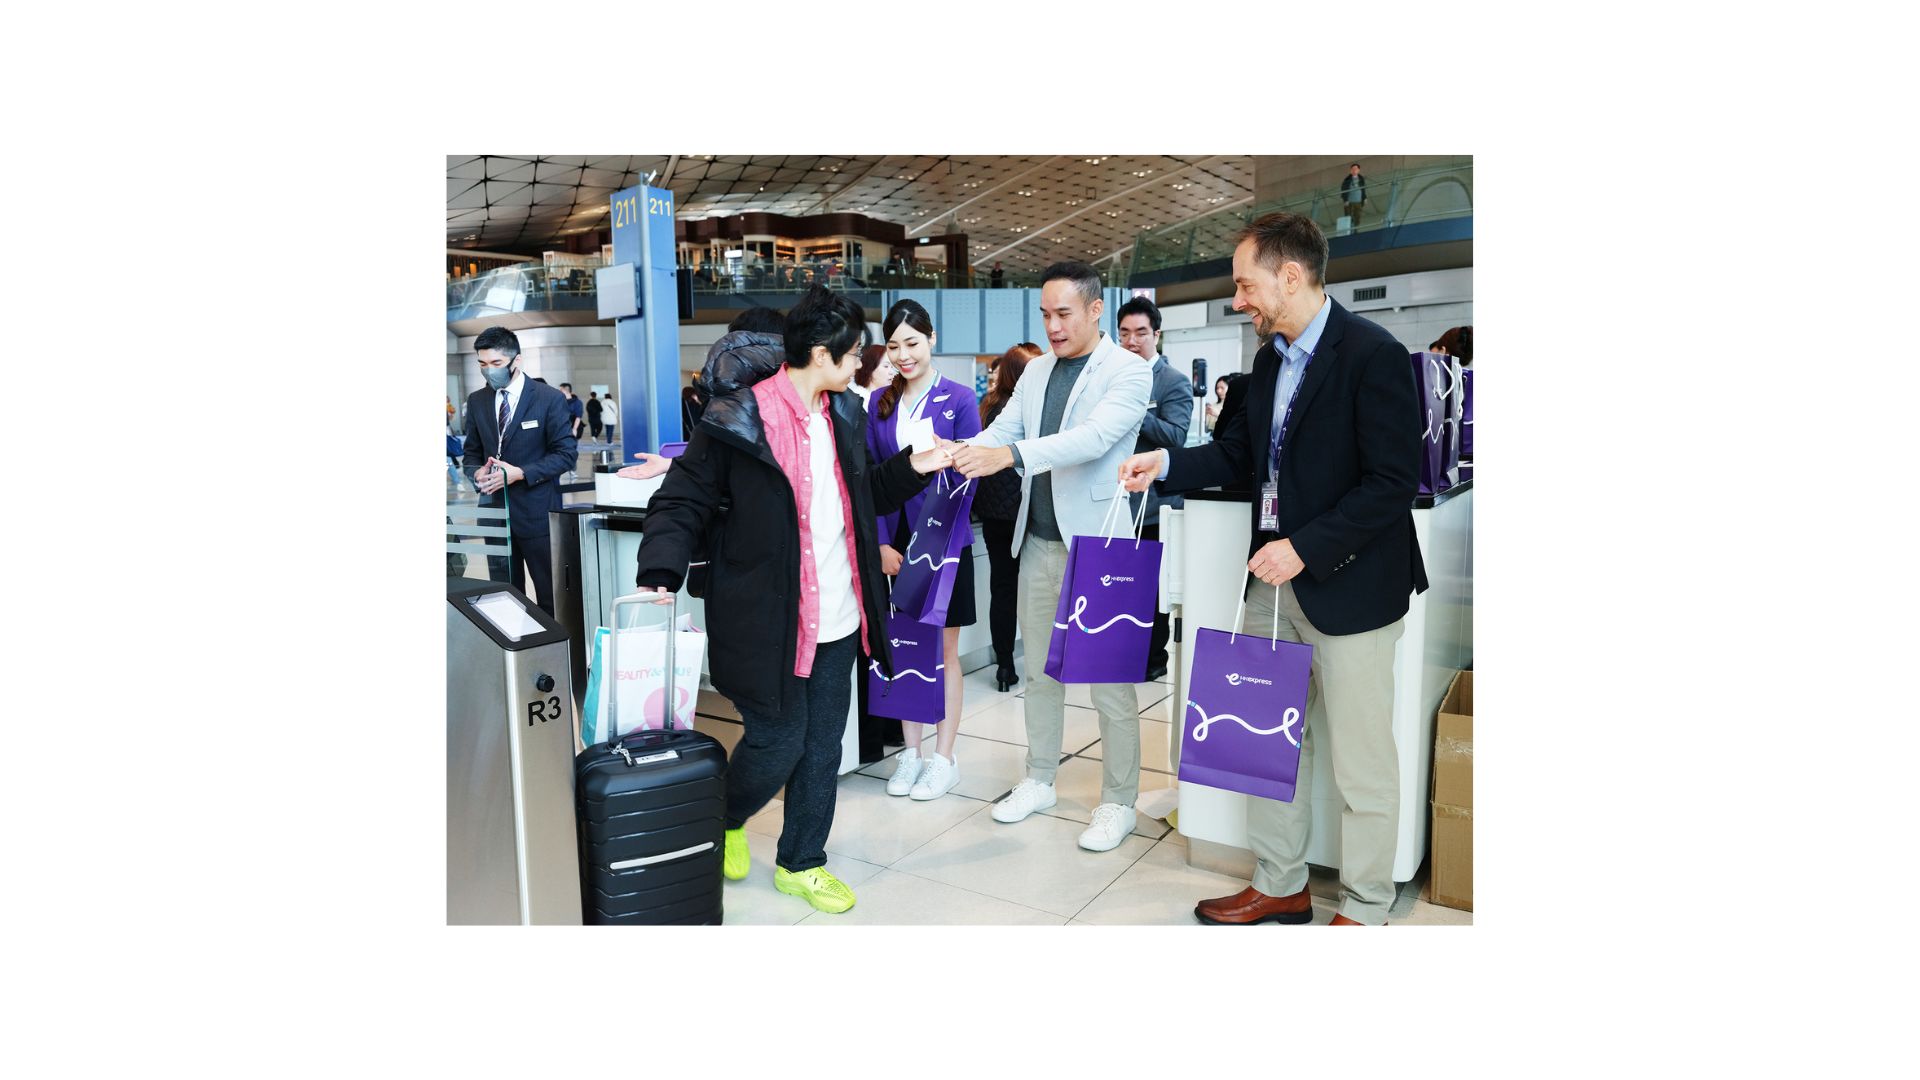 HK Express leadership team distributed souvenirs to passengers at Hong Kong International Airport to celebrate the inaugural flight of the airline's new Beijing Daxing route